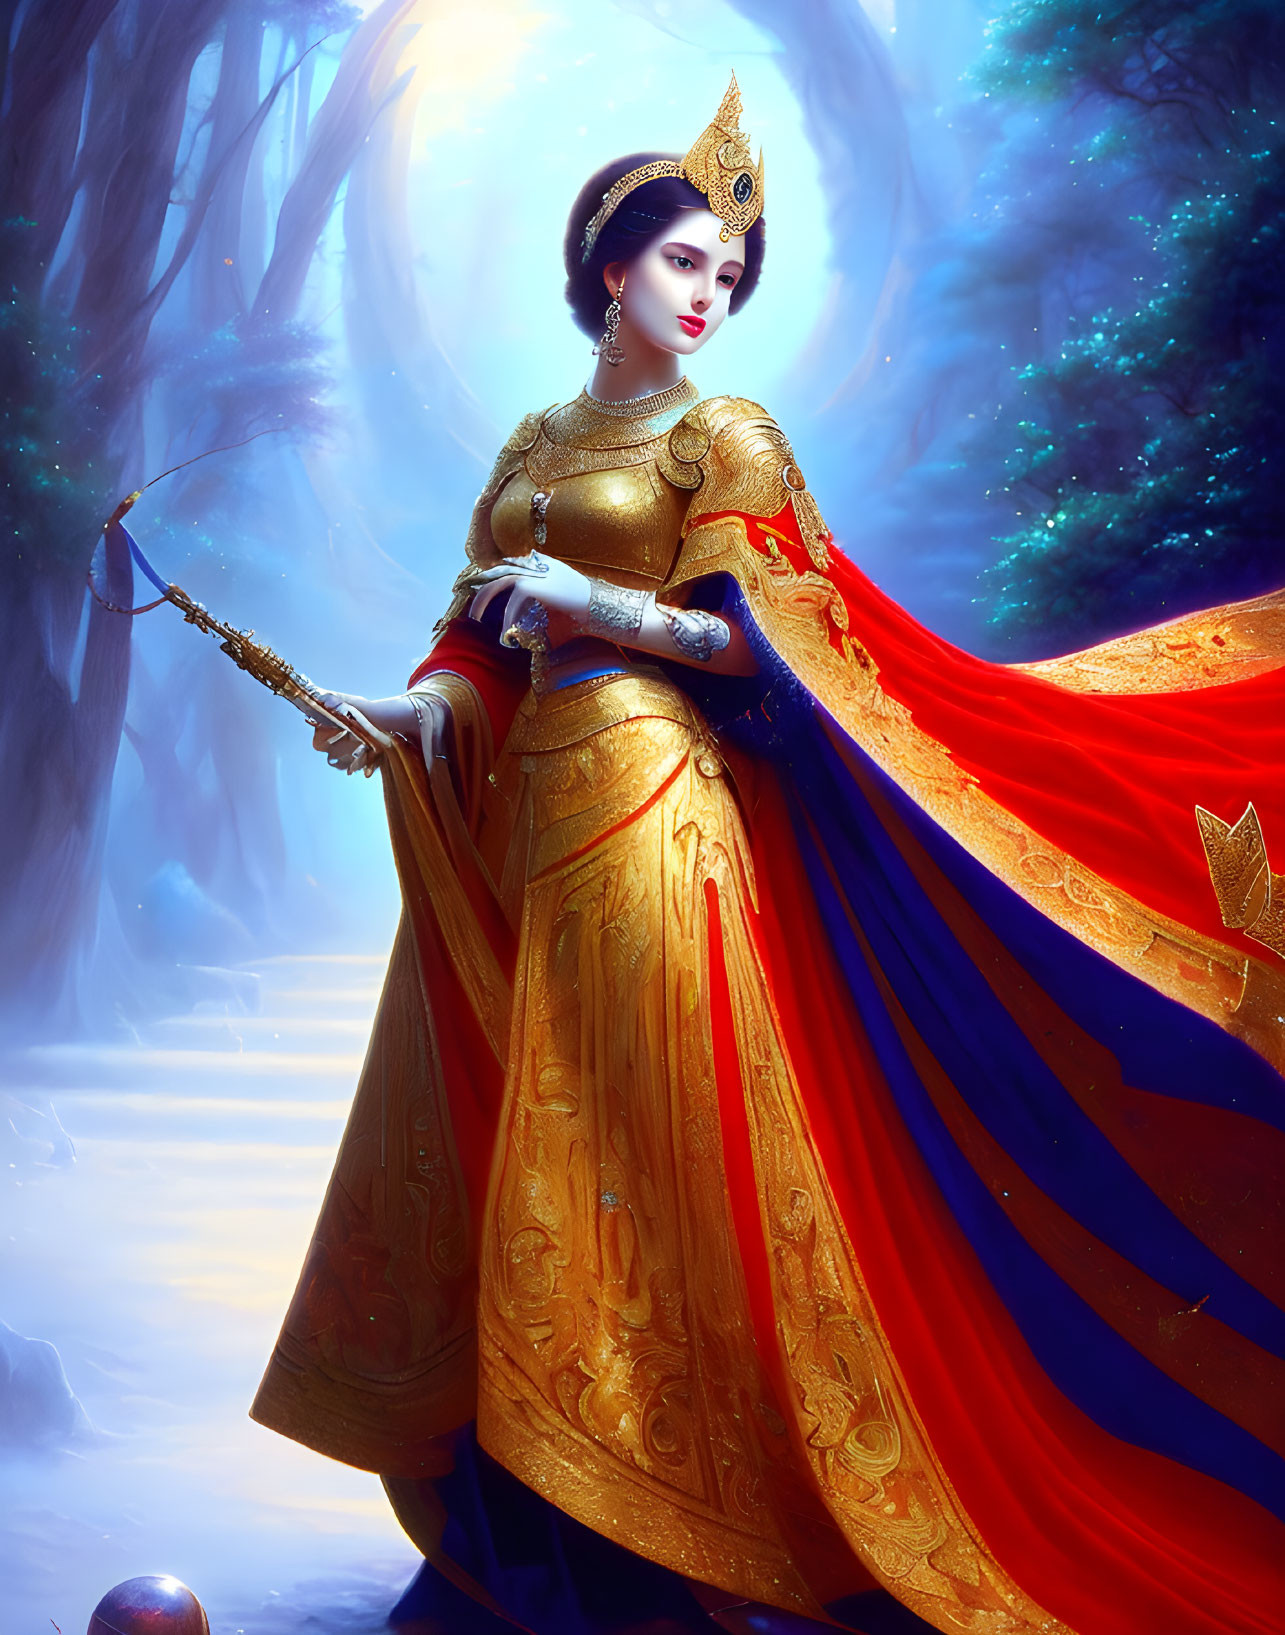 Regal woman in golden armor with staff in mystical forest